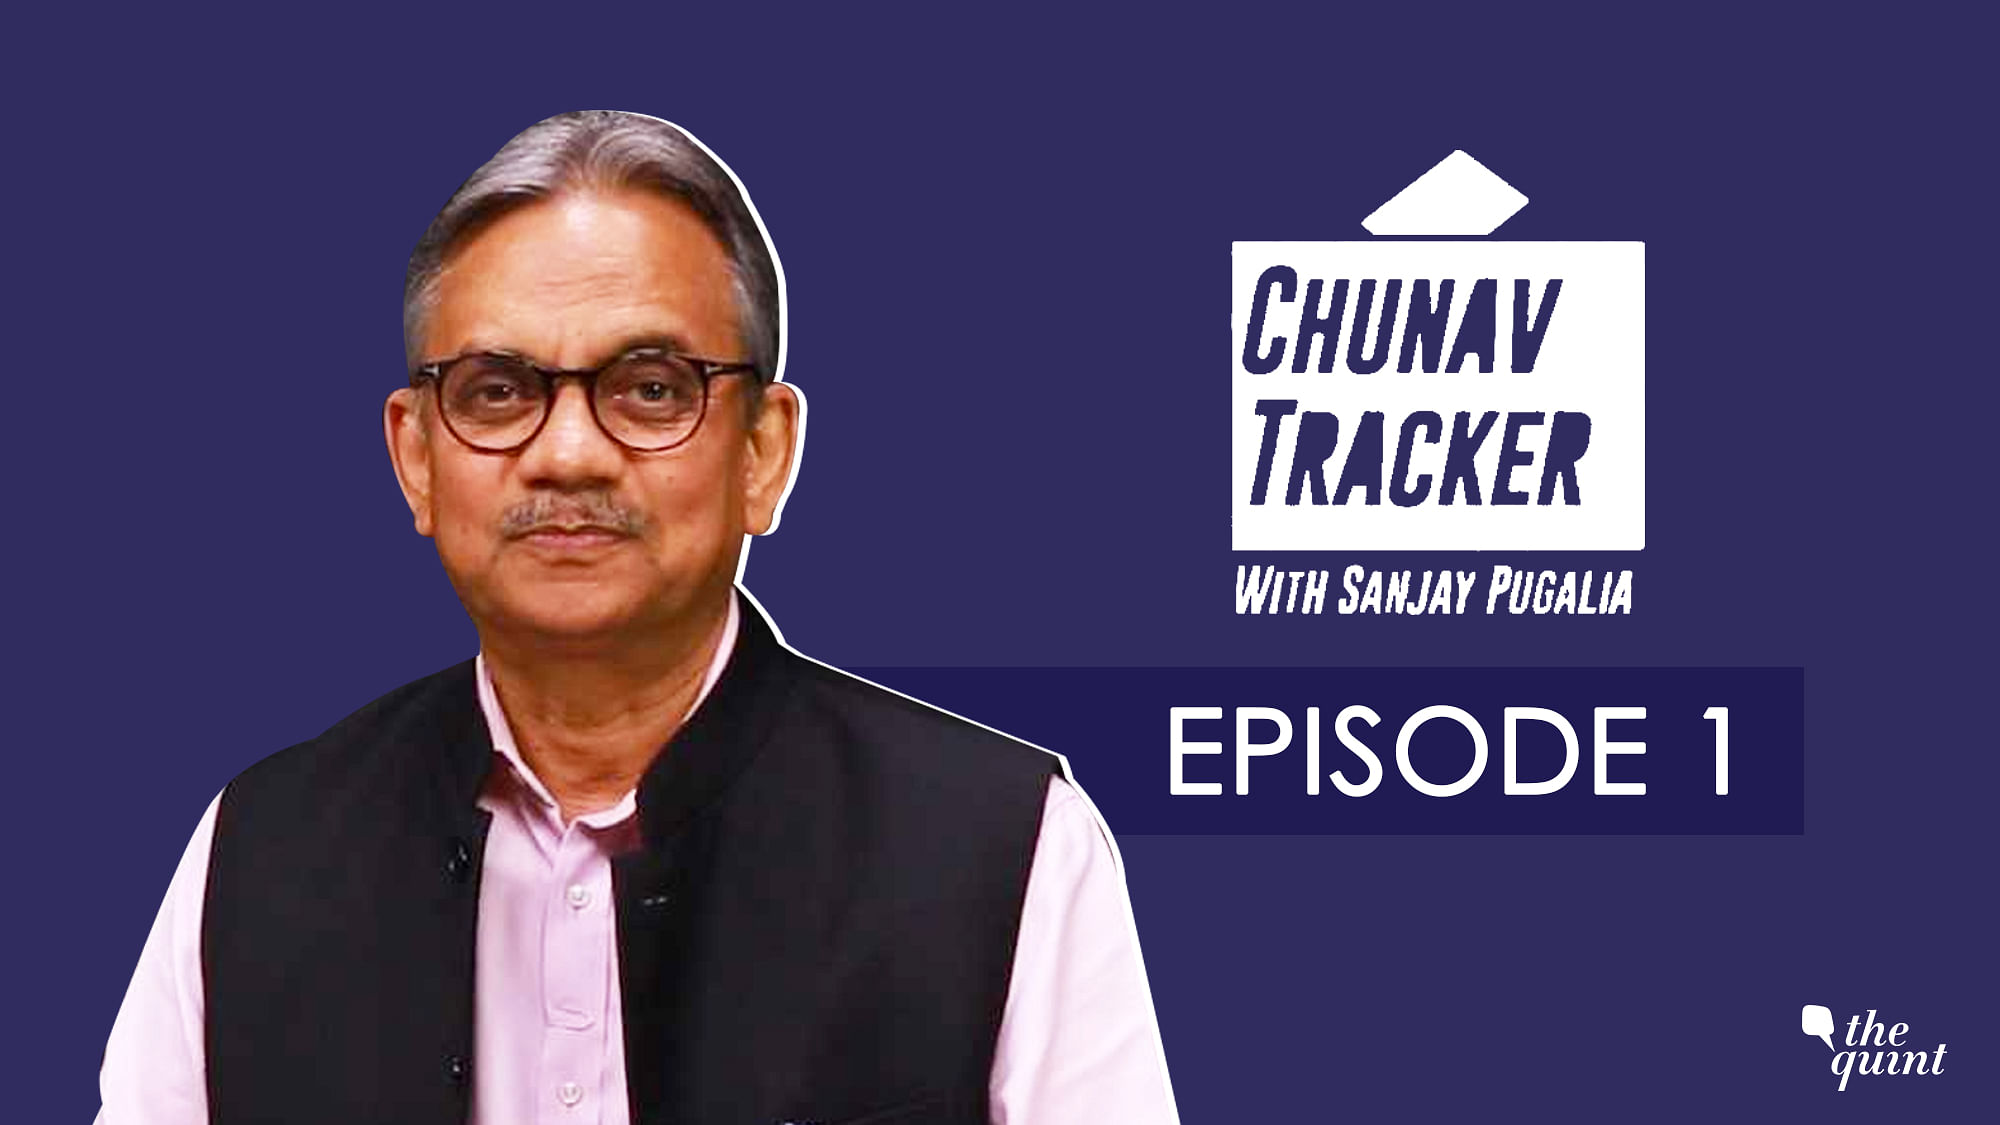 The Quint’s election special vodcast series – Chunav Tracker with The Quint’s Editorial Director, Sanjay Pugalia.